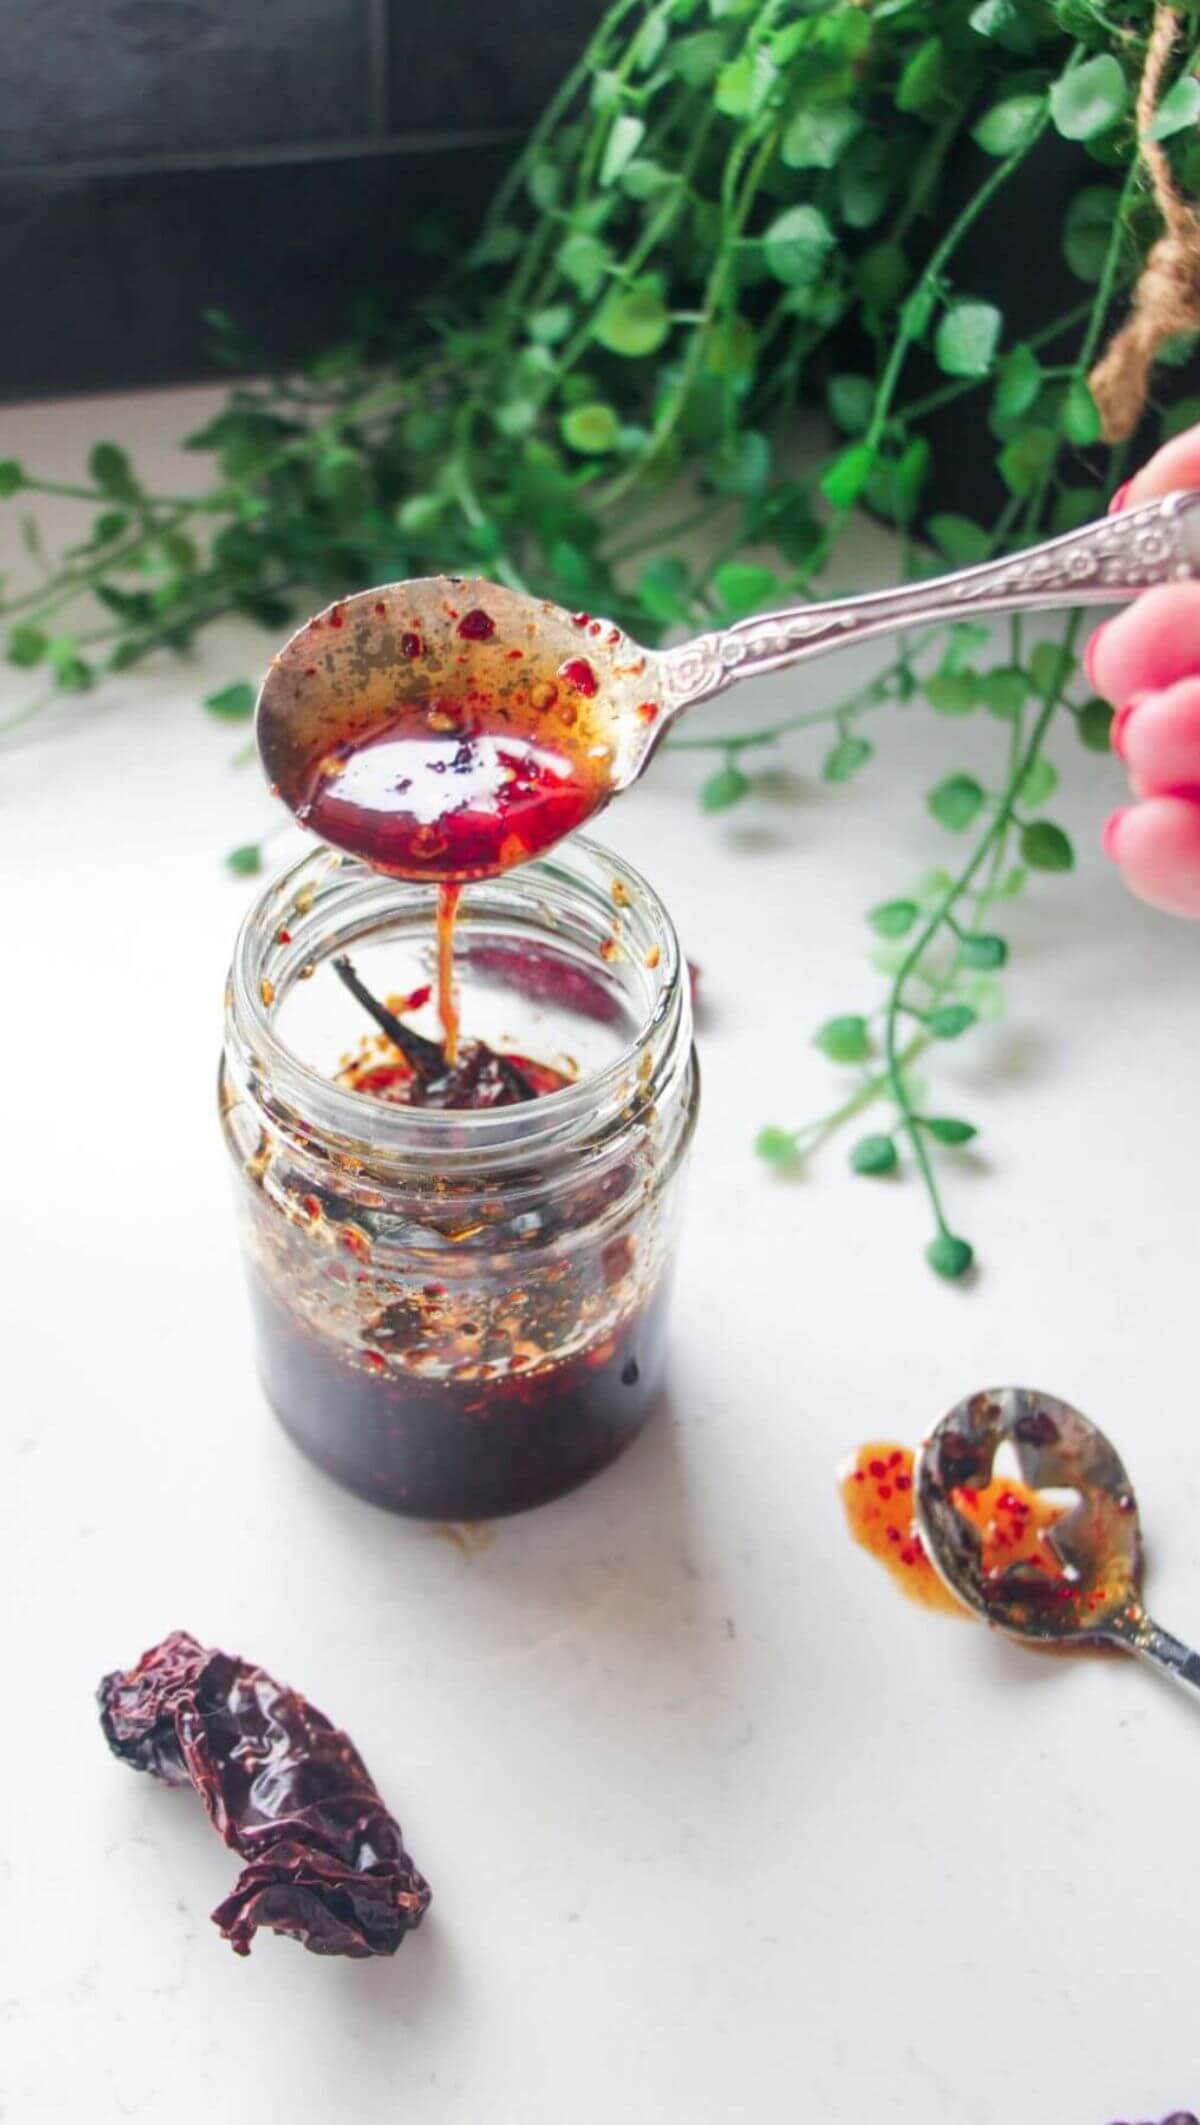 Hot honey drizzling from a silver spoon into a glass jar.